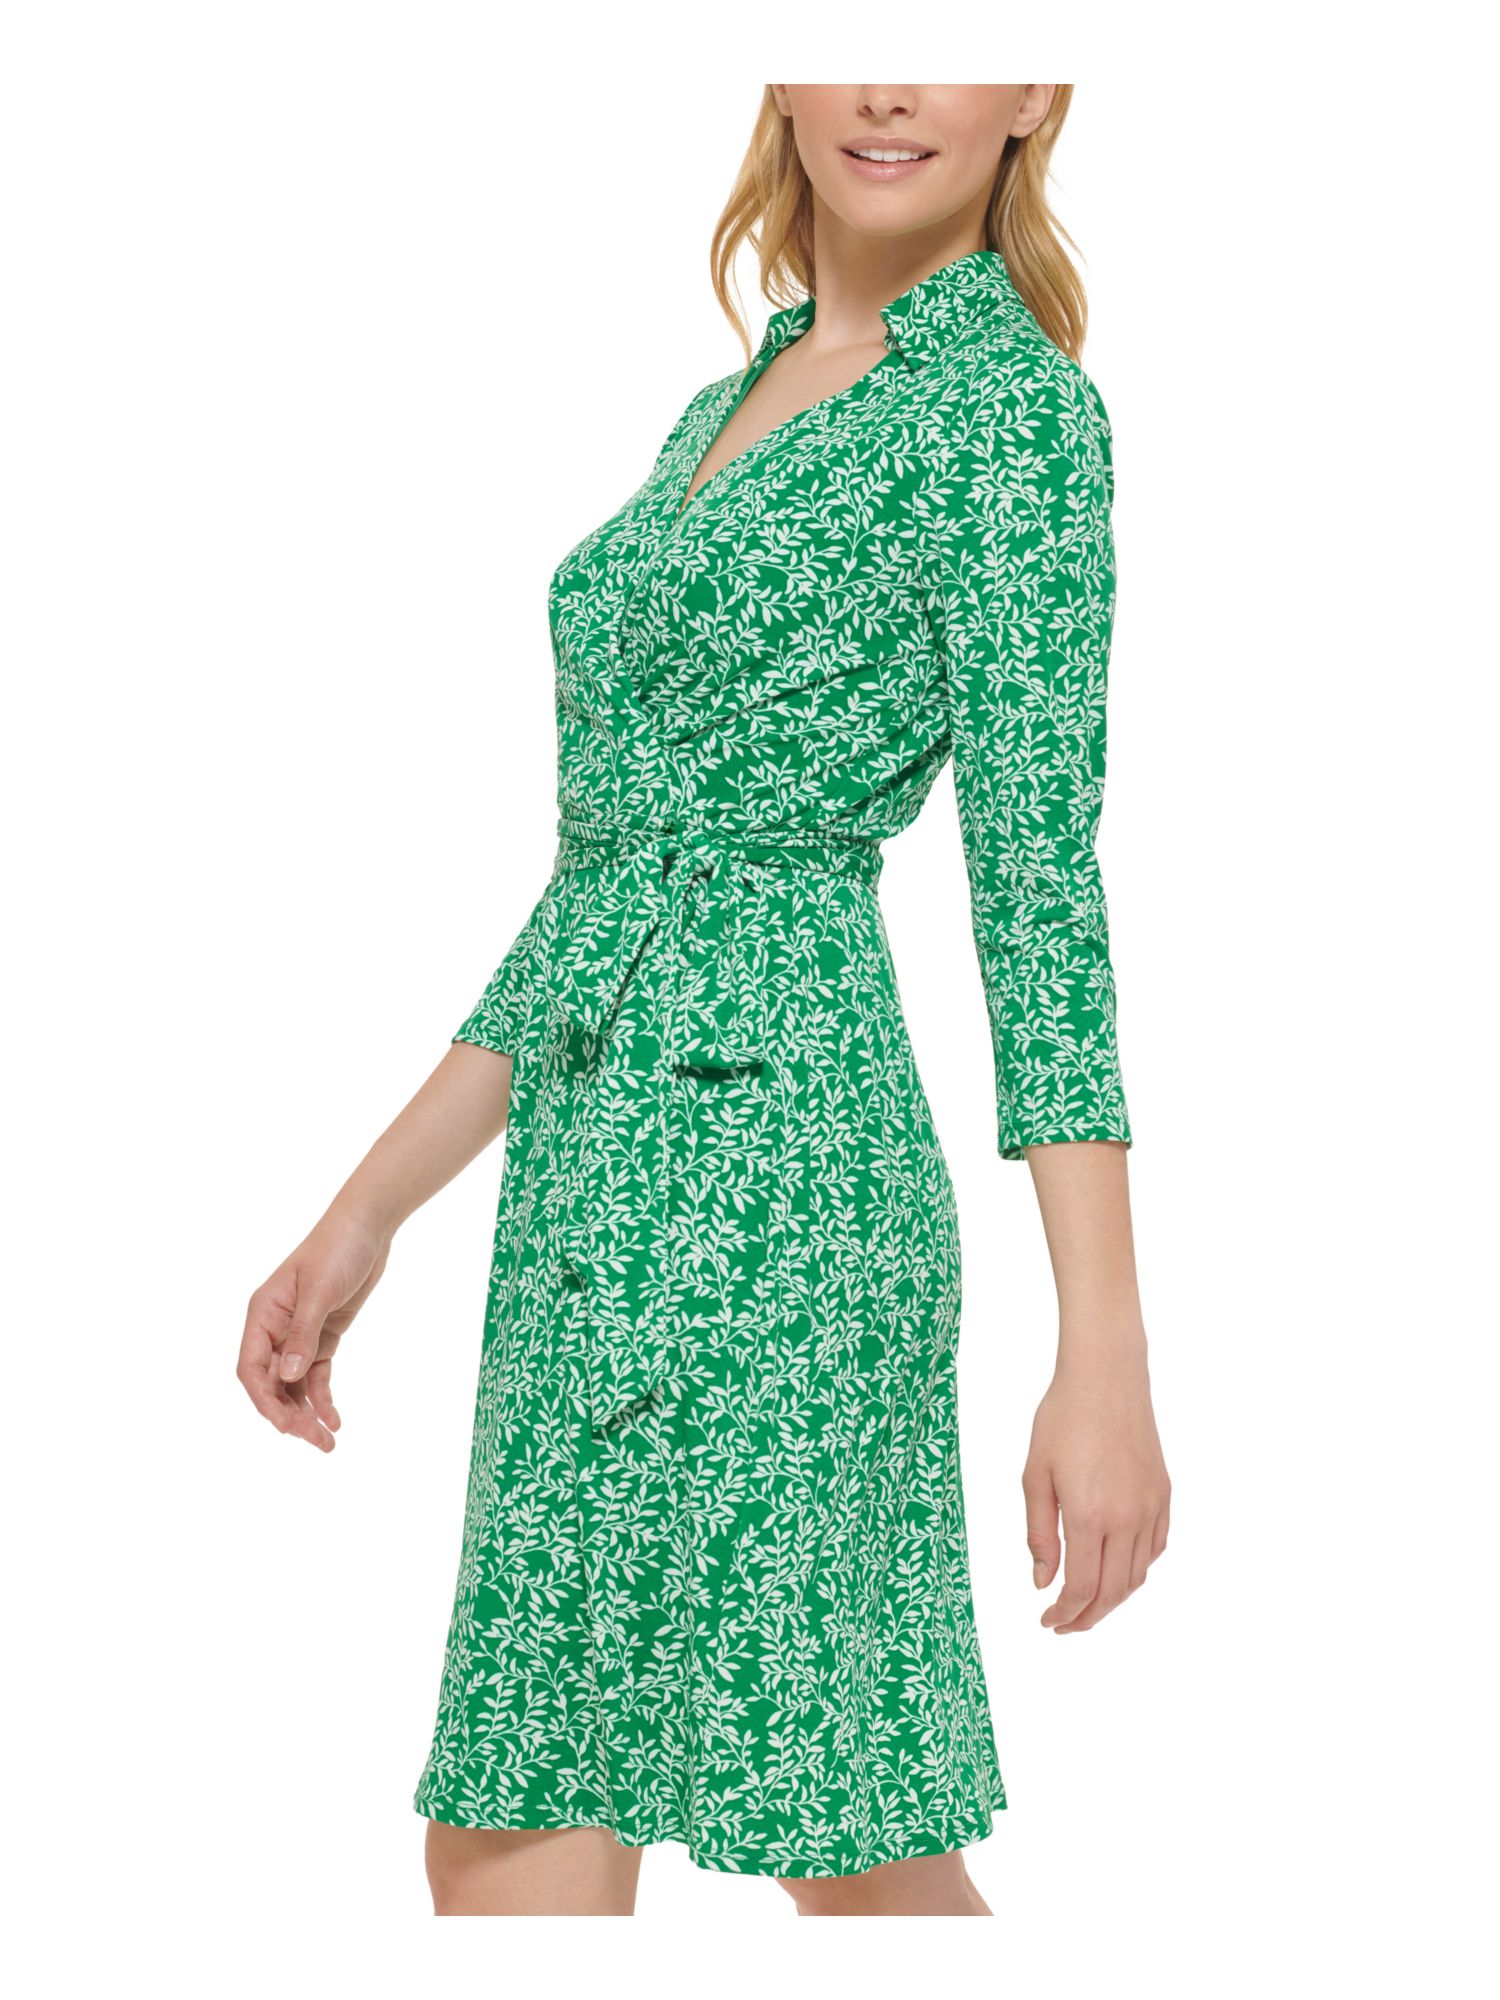 Jessica Carlyle JESSICA HOWARD Womens Green Printed 3/4 Sleeve Point Collar Knee Length Wear To Work Faux Wrap Dress 16